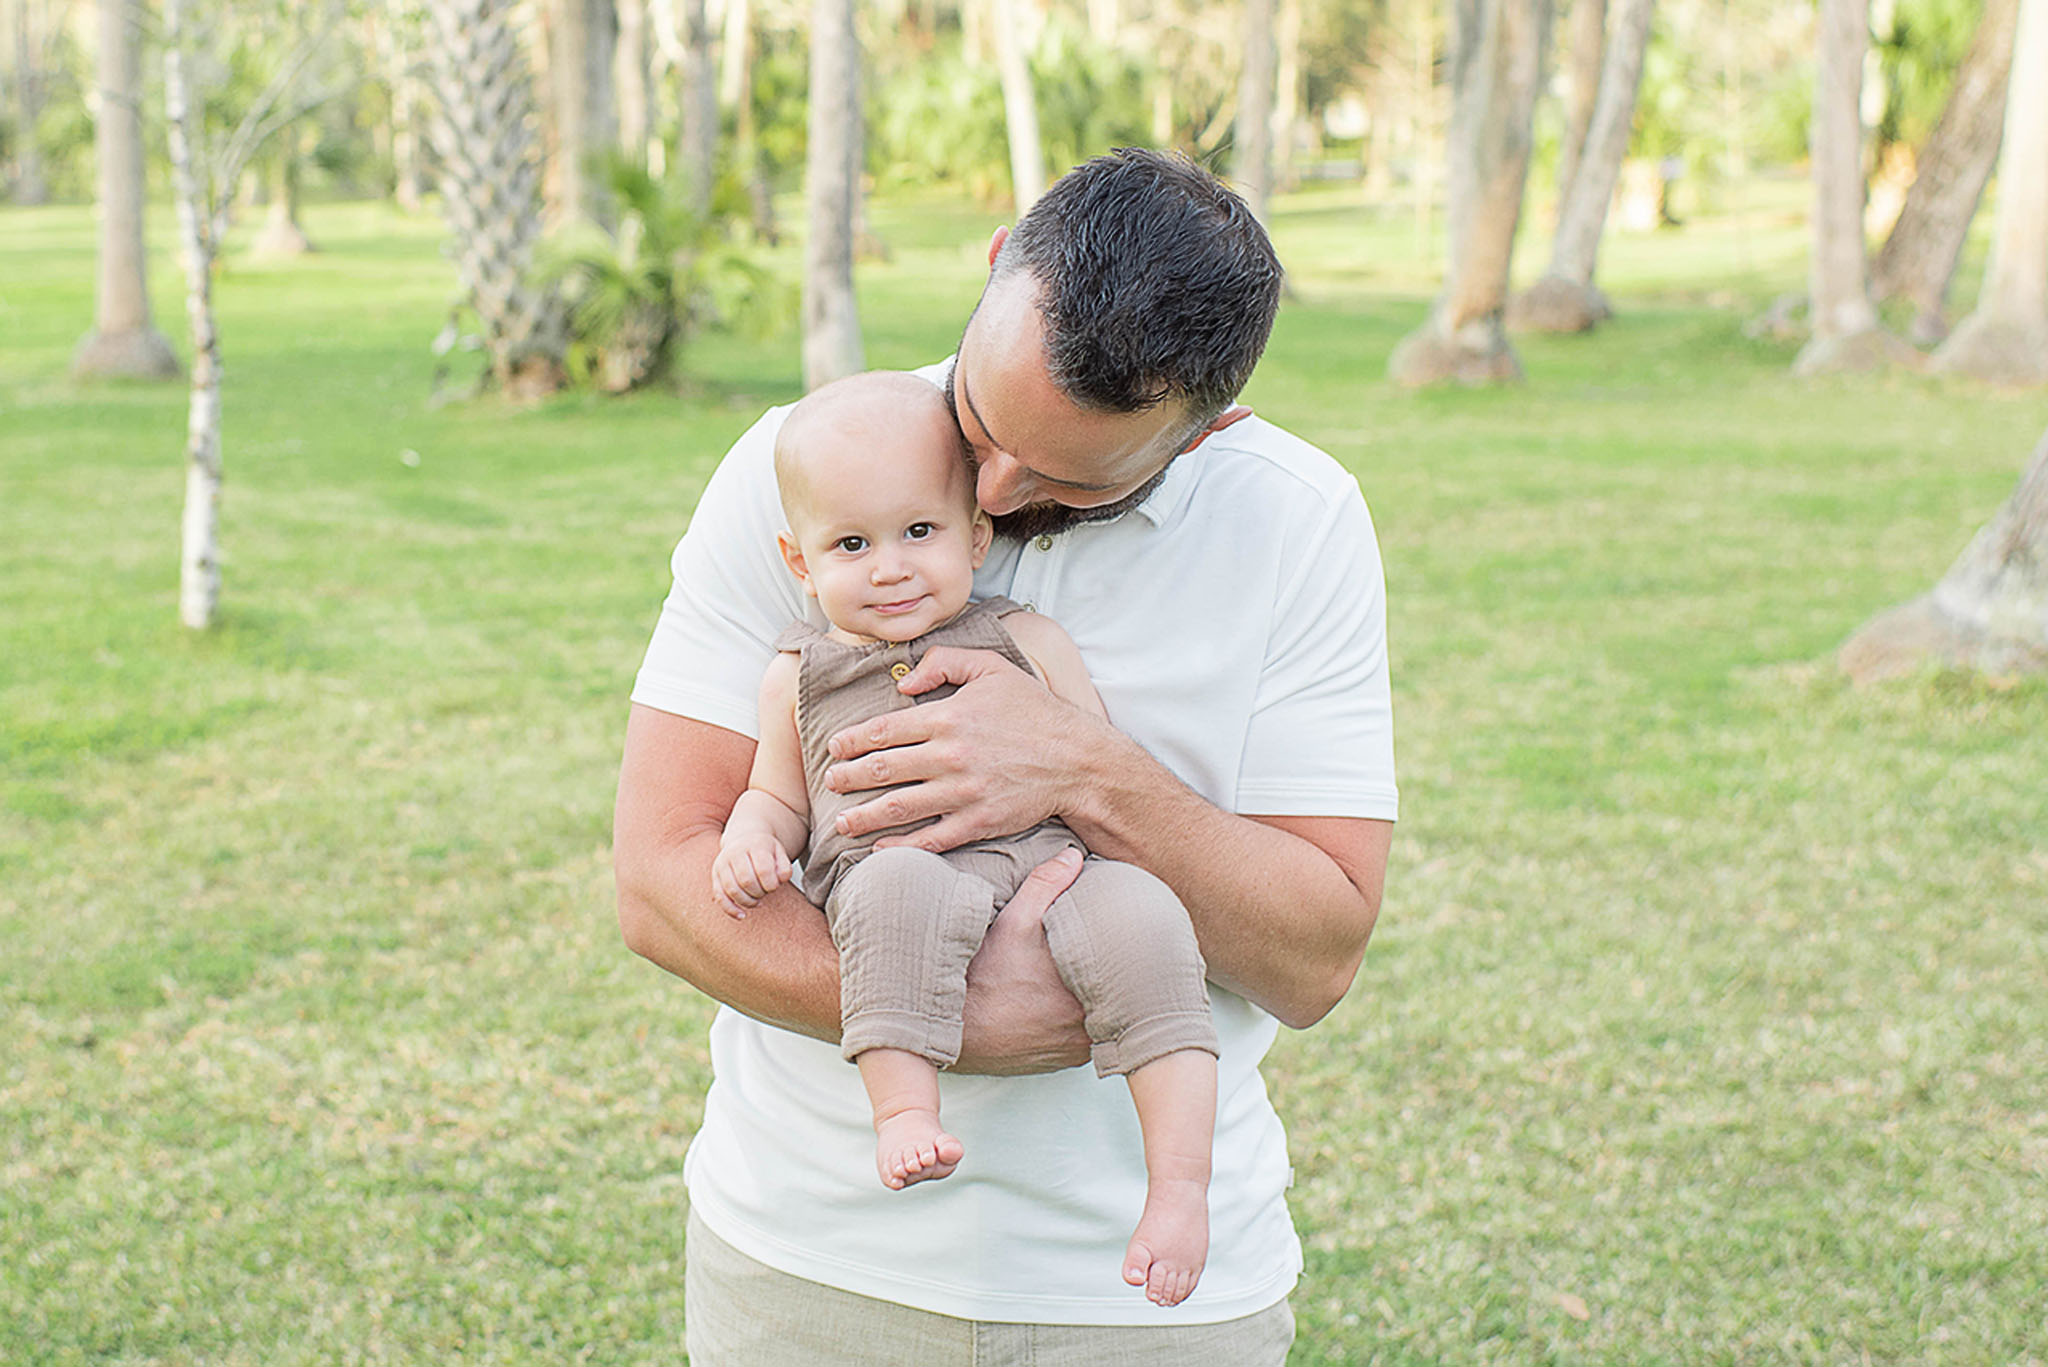 A father kisses and cradles his infant son while standing in a grassy field of palm trees jacksonville nannies